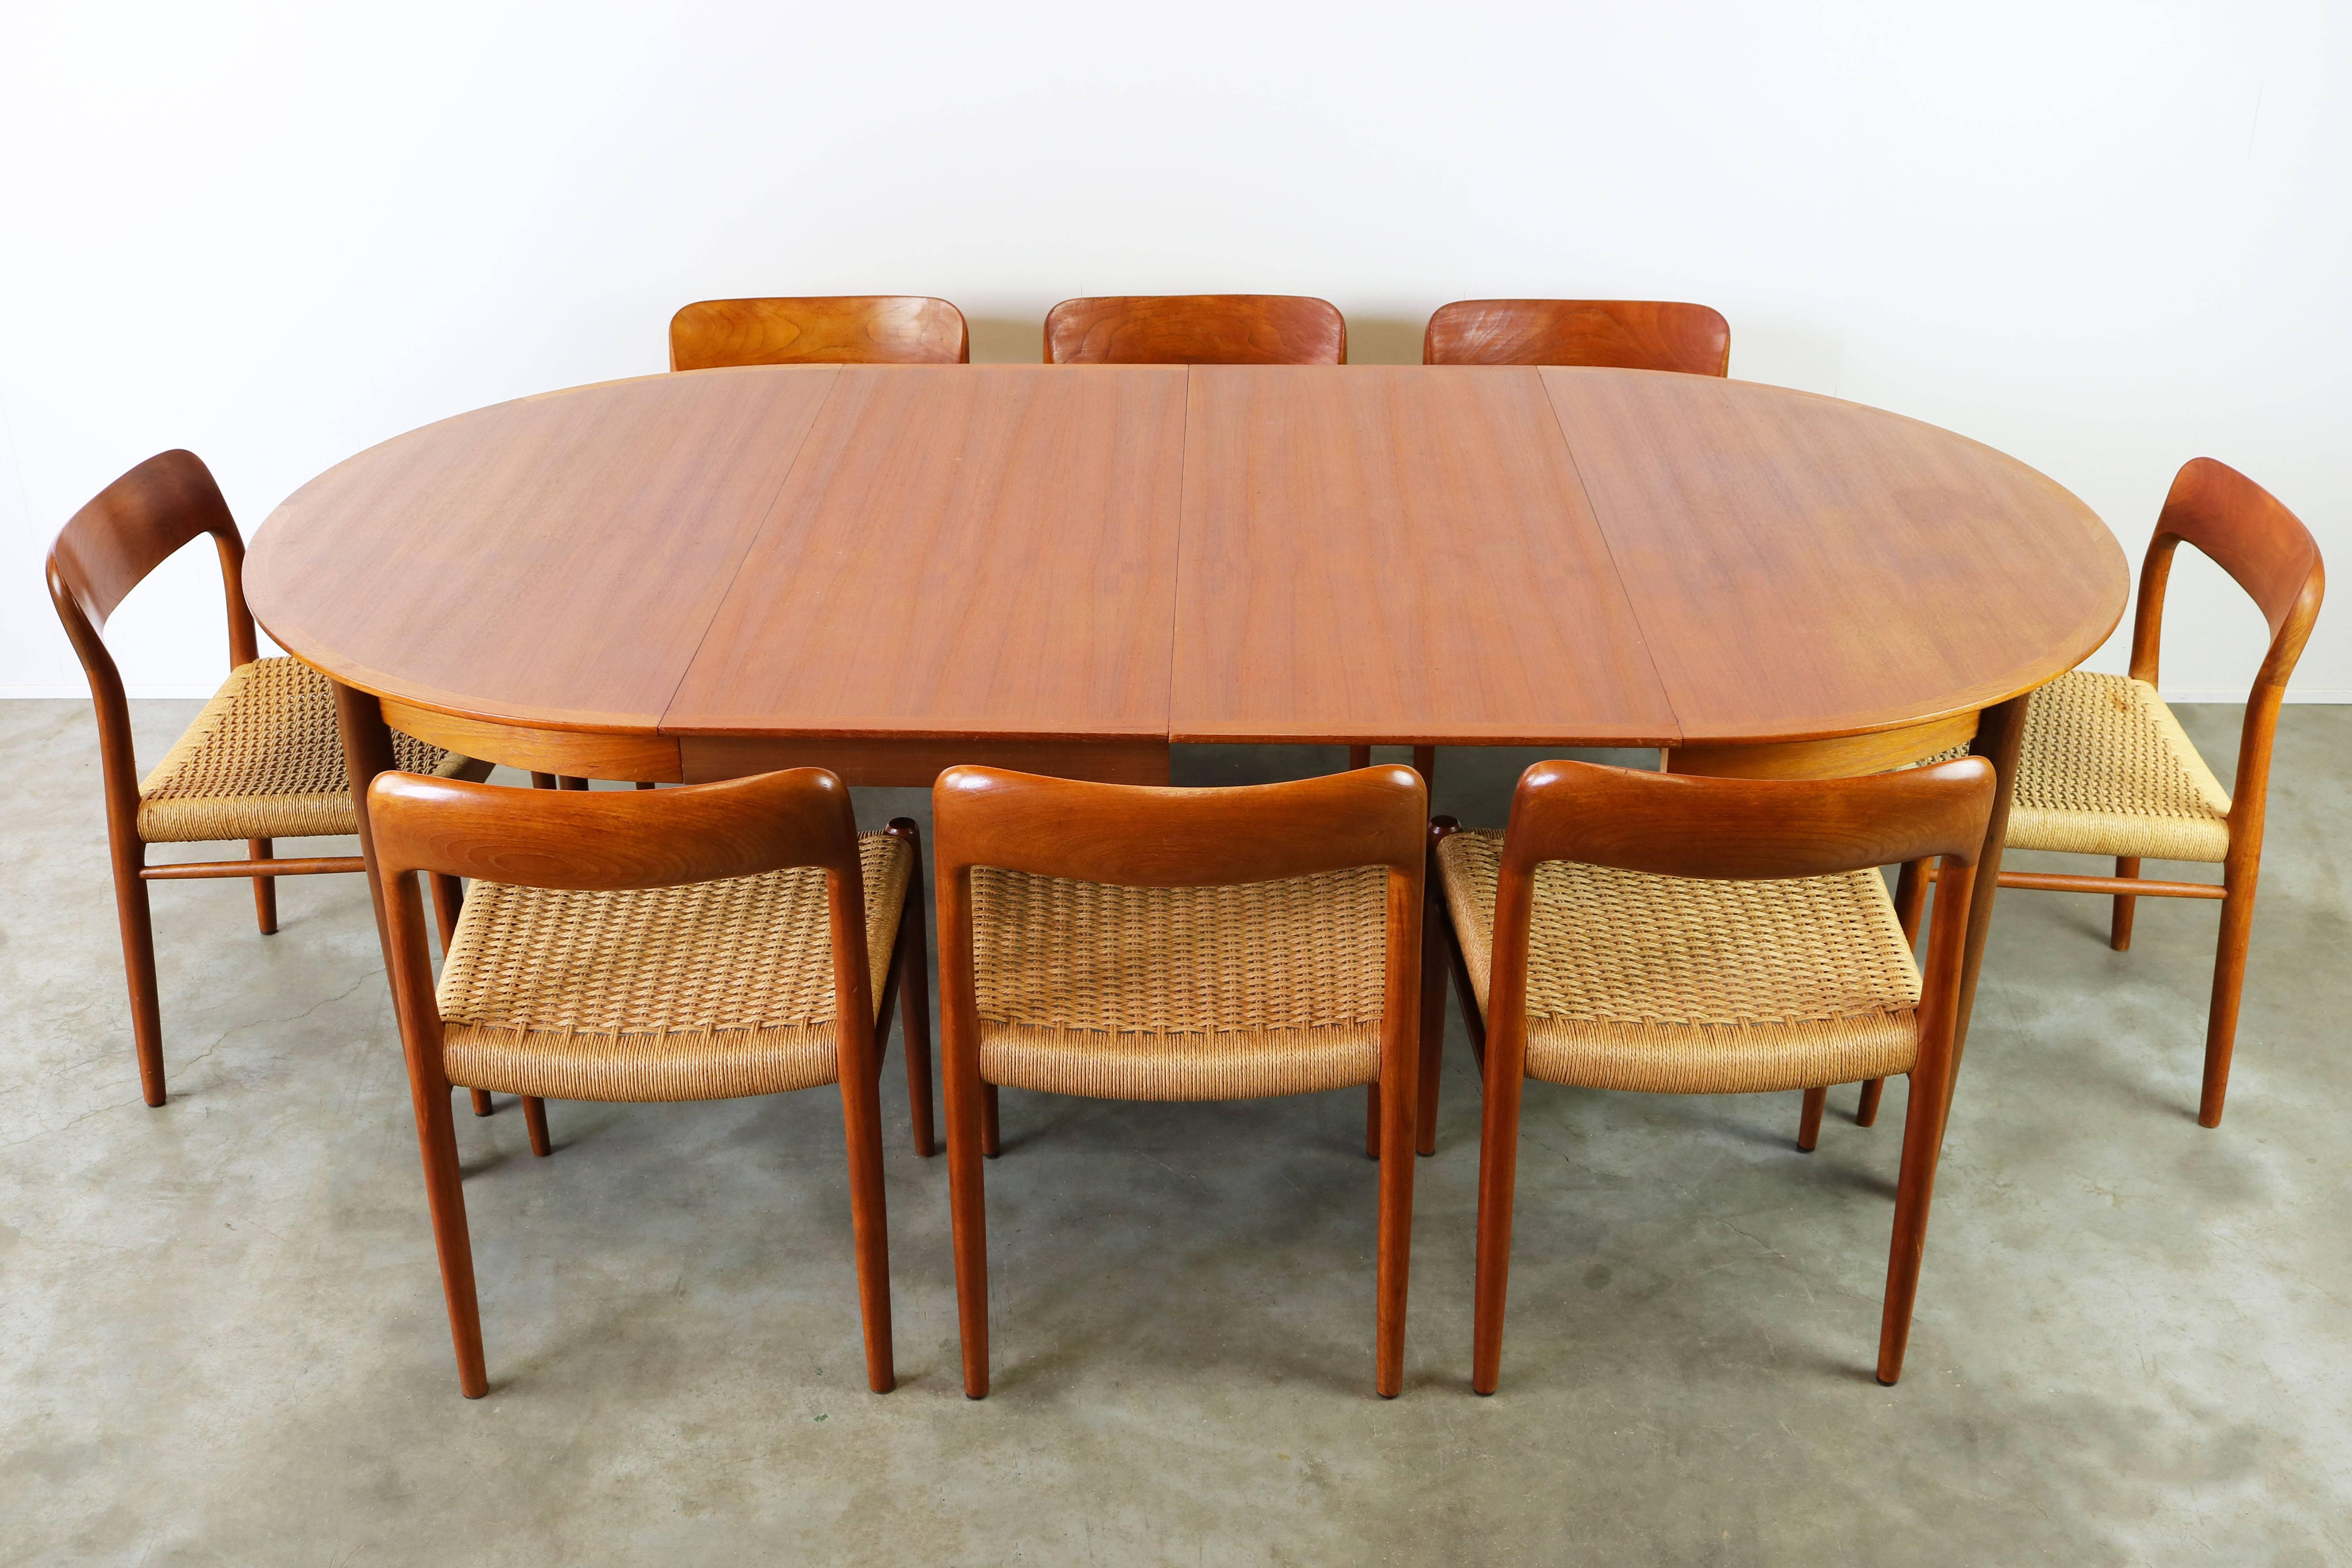 Very large and rare dining room set designed by Niels Otto Møller and produced by J.L Mollers in the 1950s. The set has eight Model 75 chairs in teak and papercord. and a large round (twice extendable) table in teak. 
The table can be used round